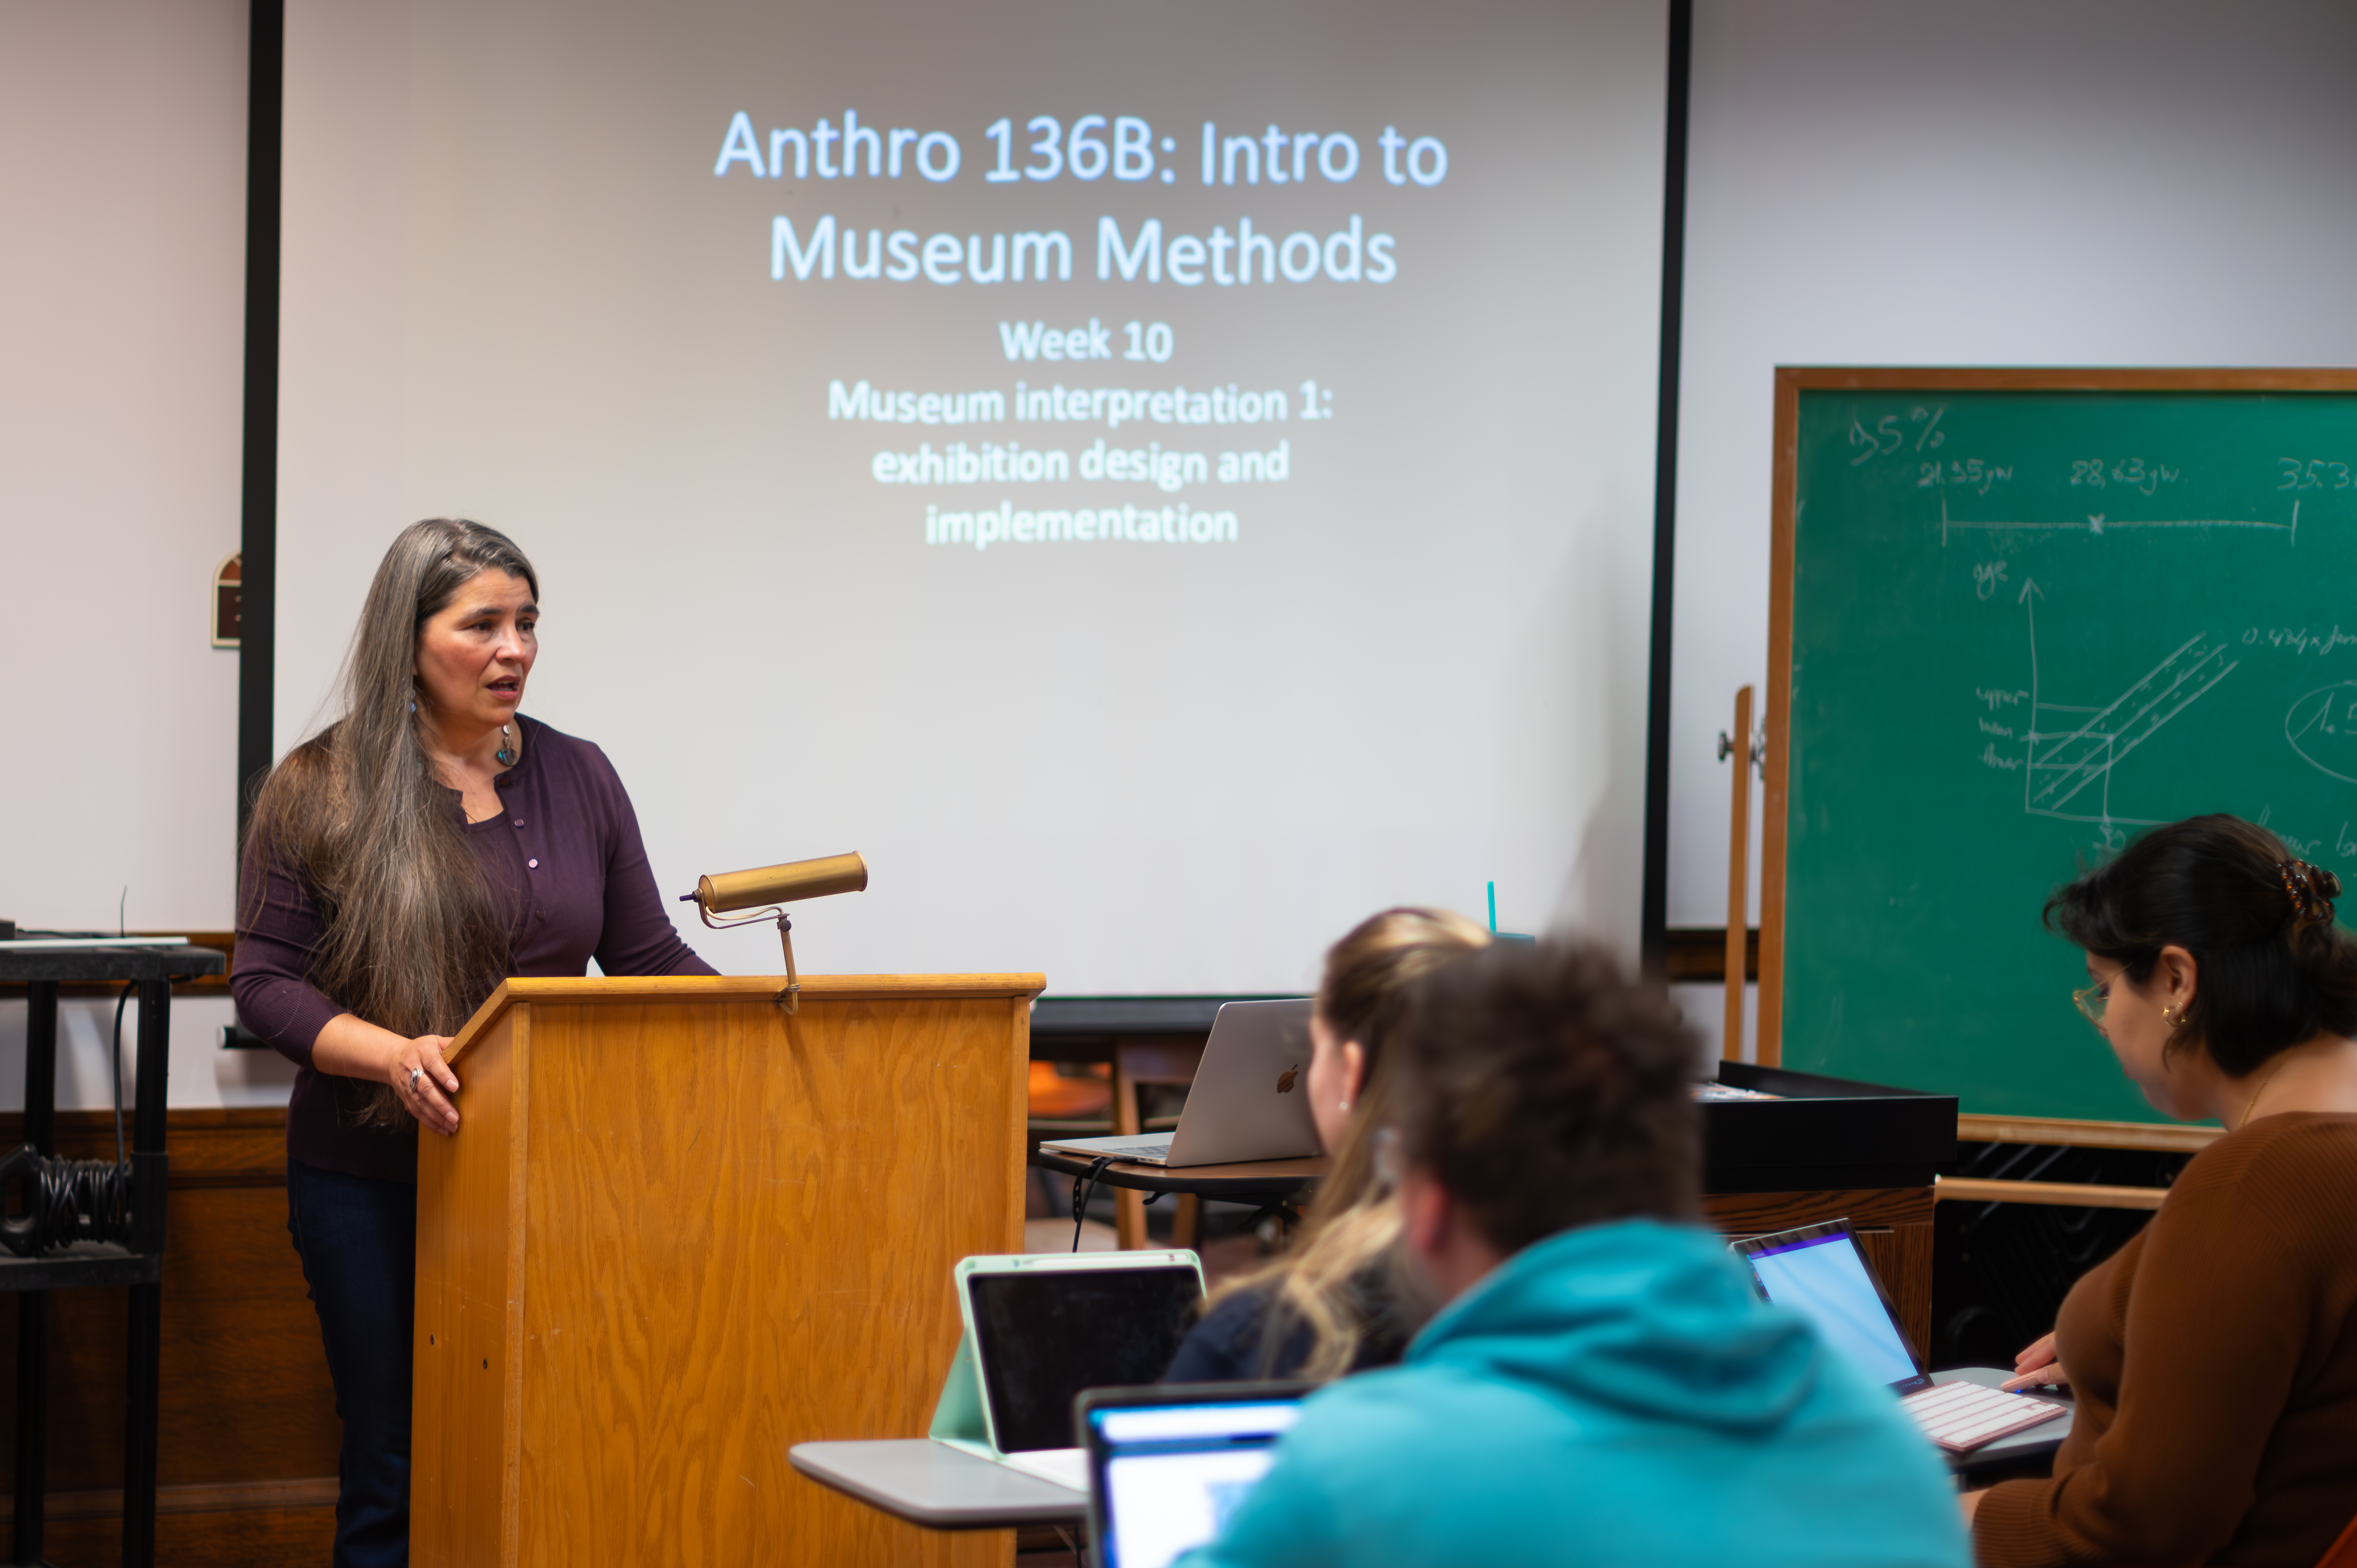 Carolyn Smith speaks at a lectern with a screen projection behind her reading "Anthro 136B: Intro to Museum Methods". Students at desks listen and take notes.